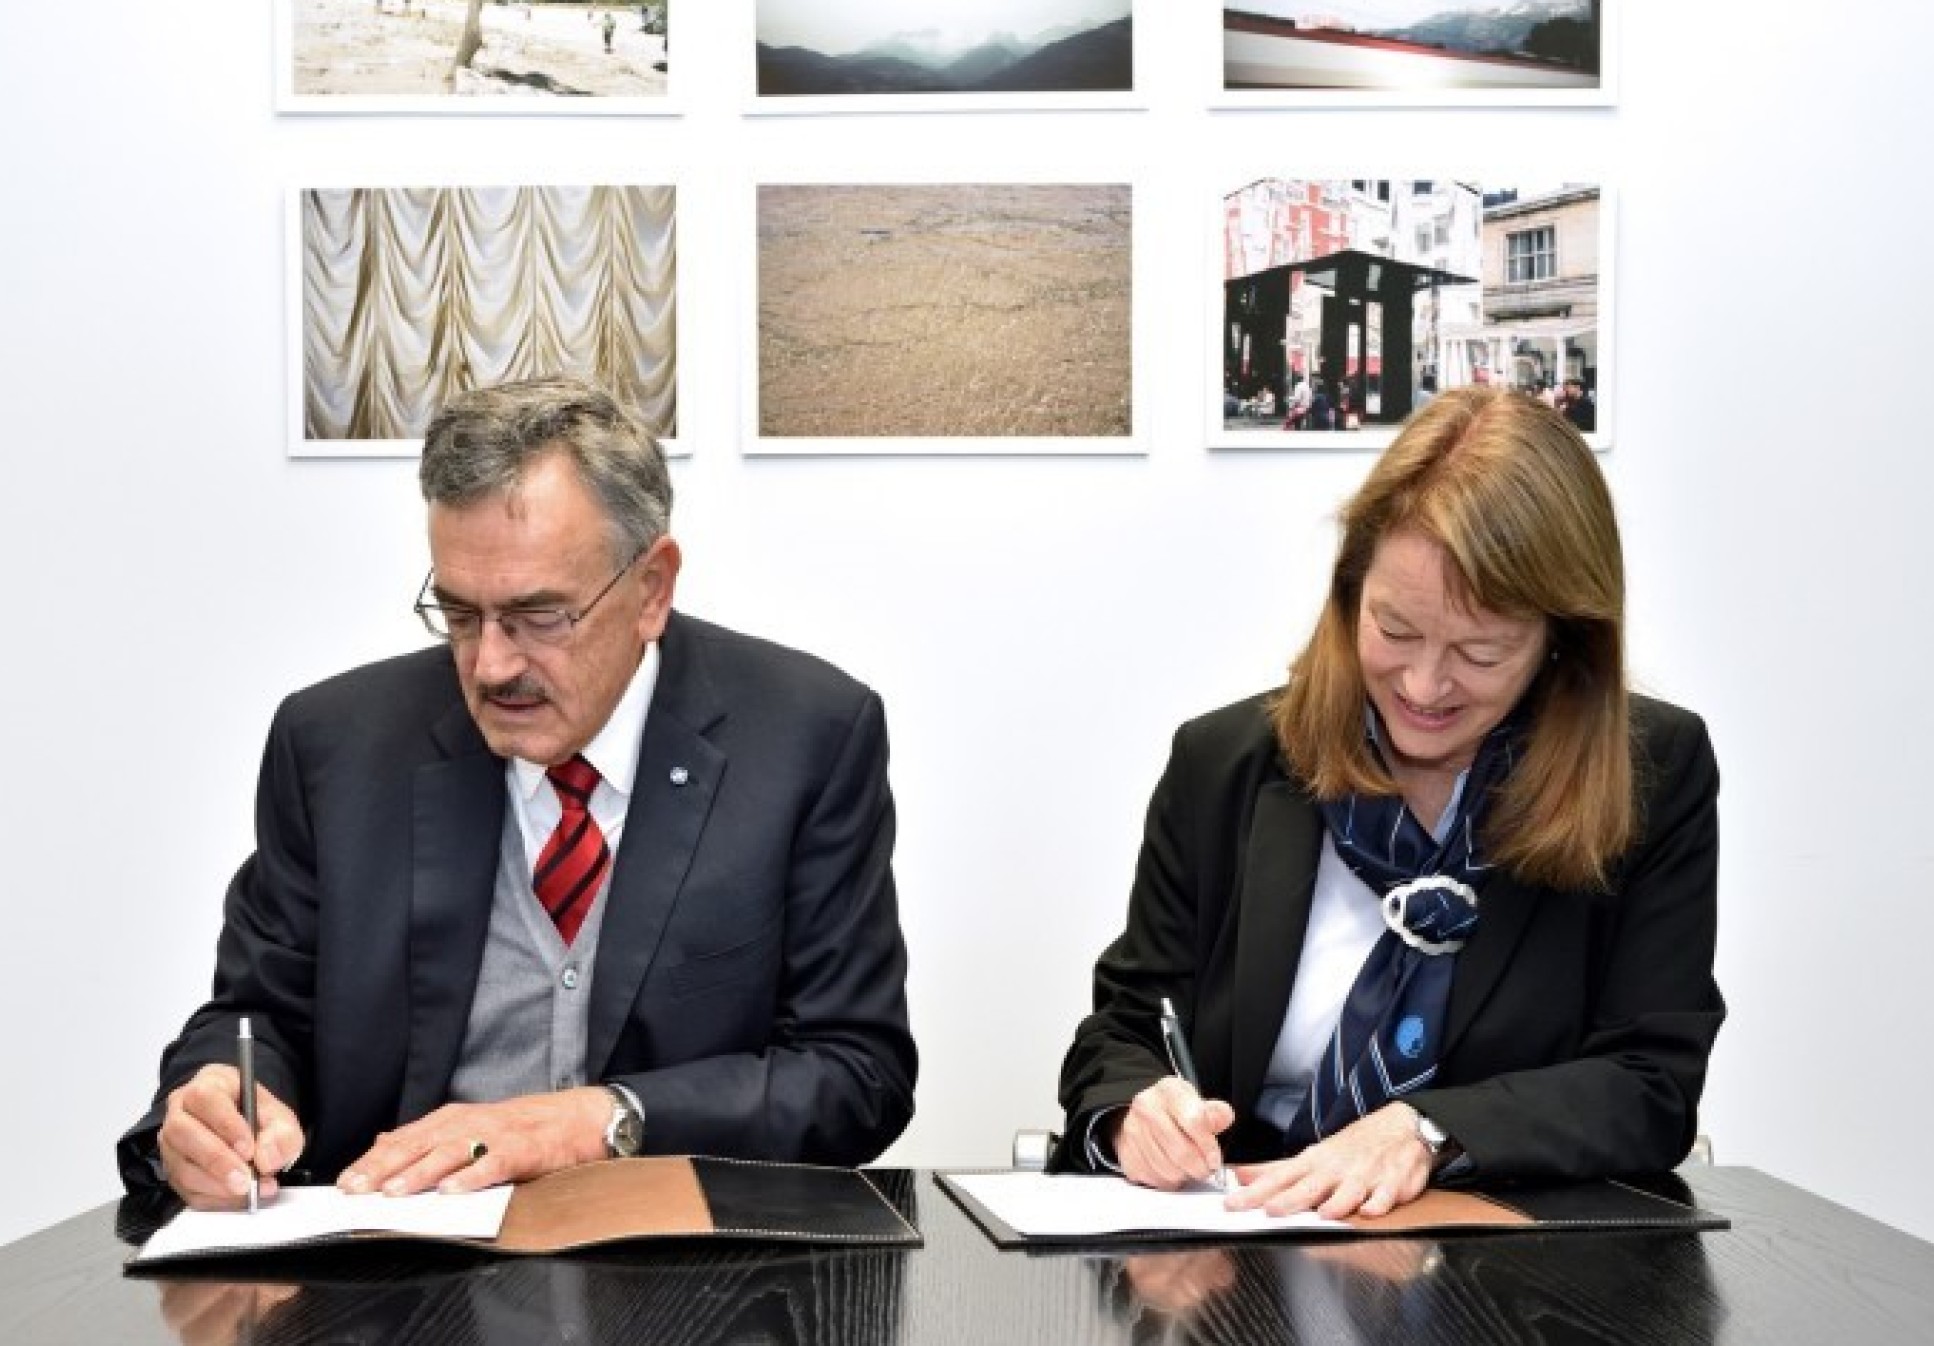 Figure 1- Professor Alice Gast, President of Imperial, and Professor Wolfgang Herrman, then President of TUM, signed the partnership in early 2019